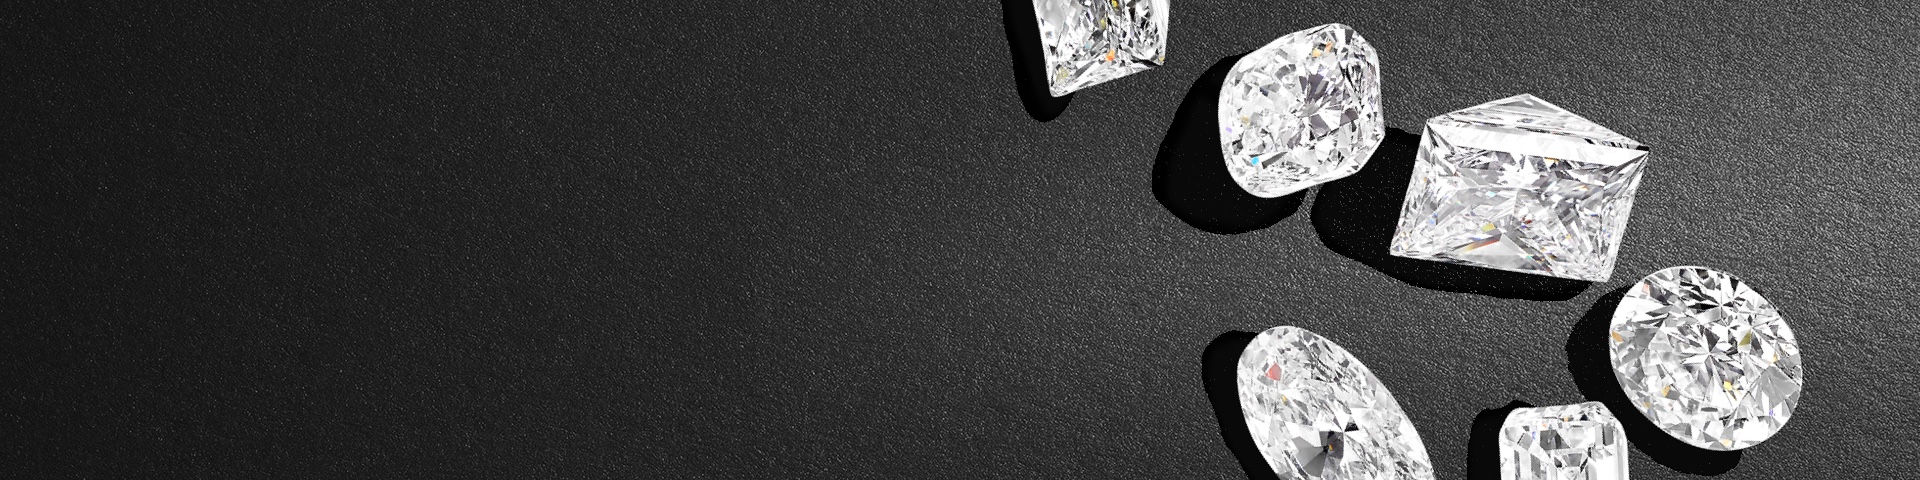 Image shows large multiple diamond cuts on a black textured background.